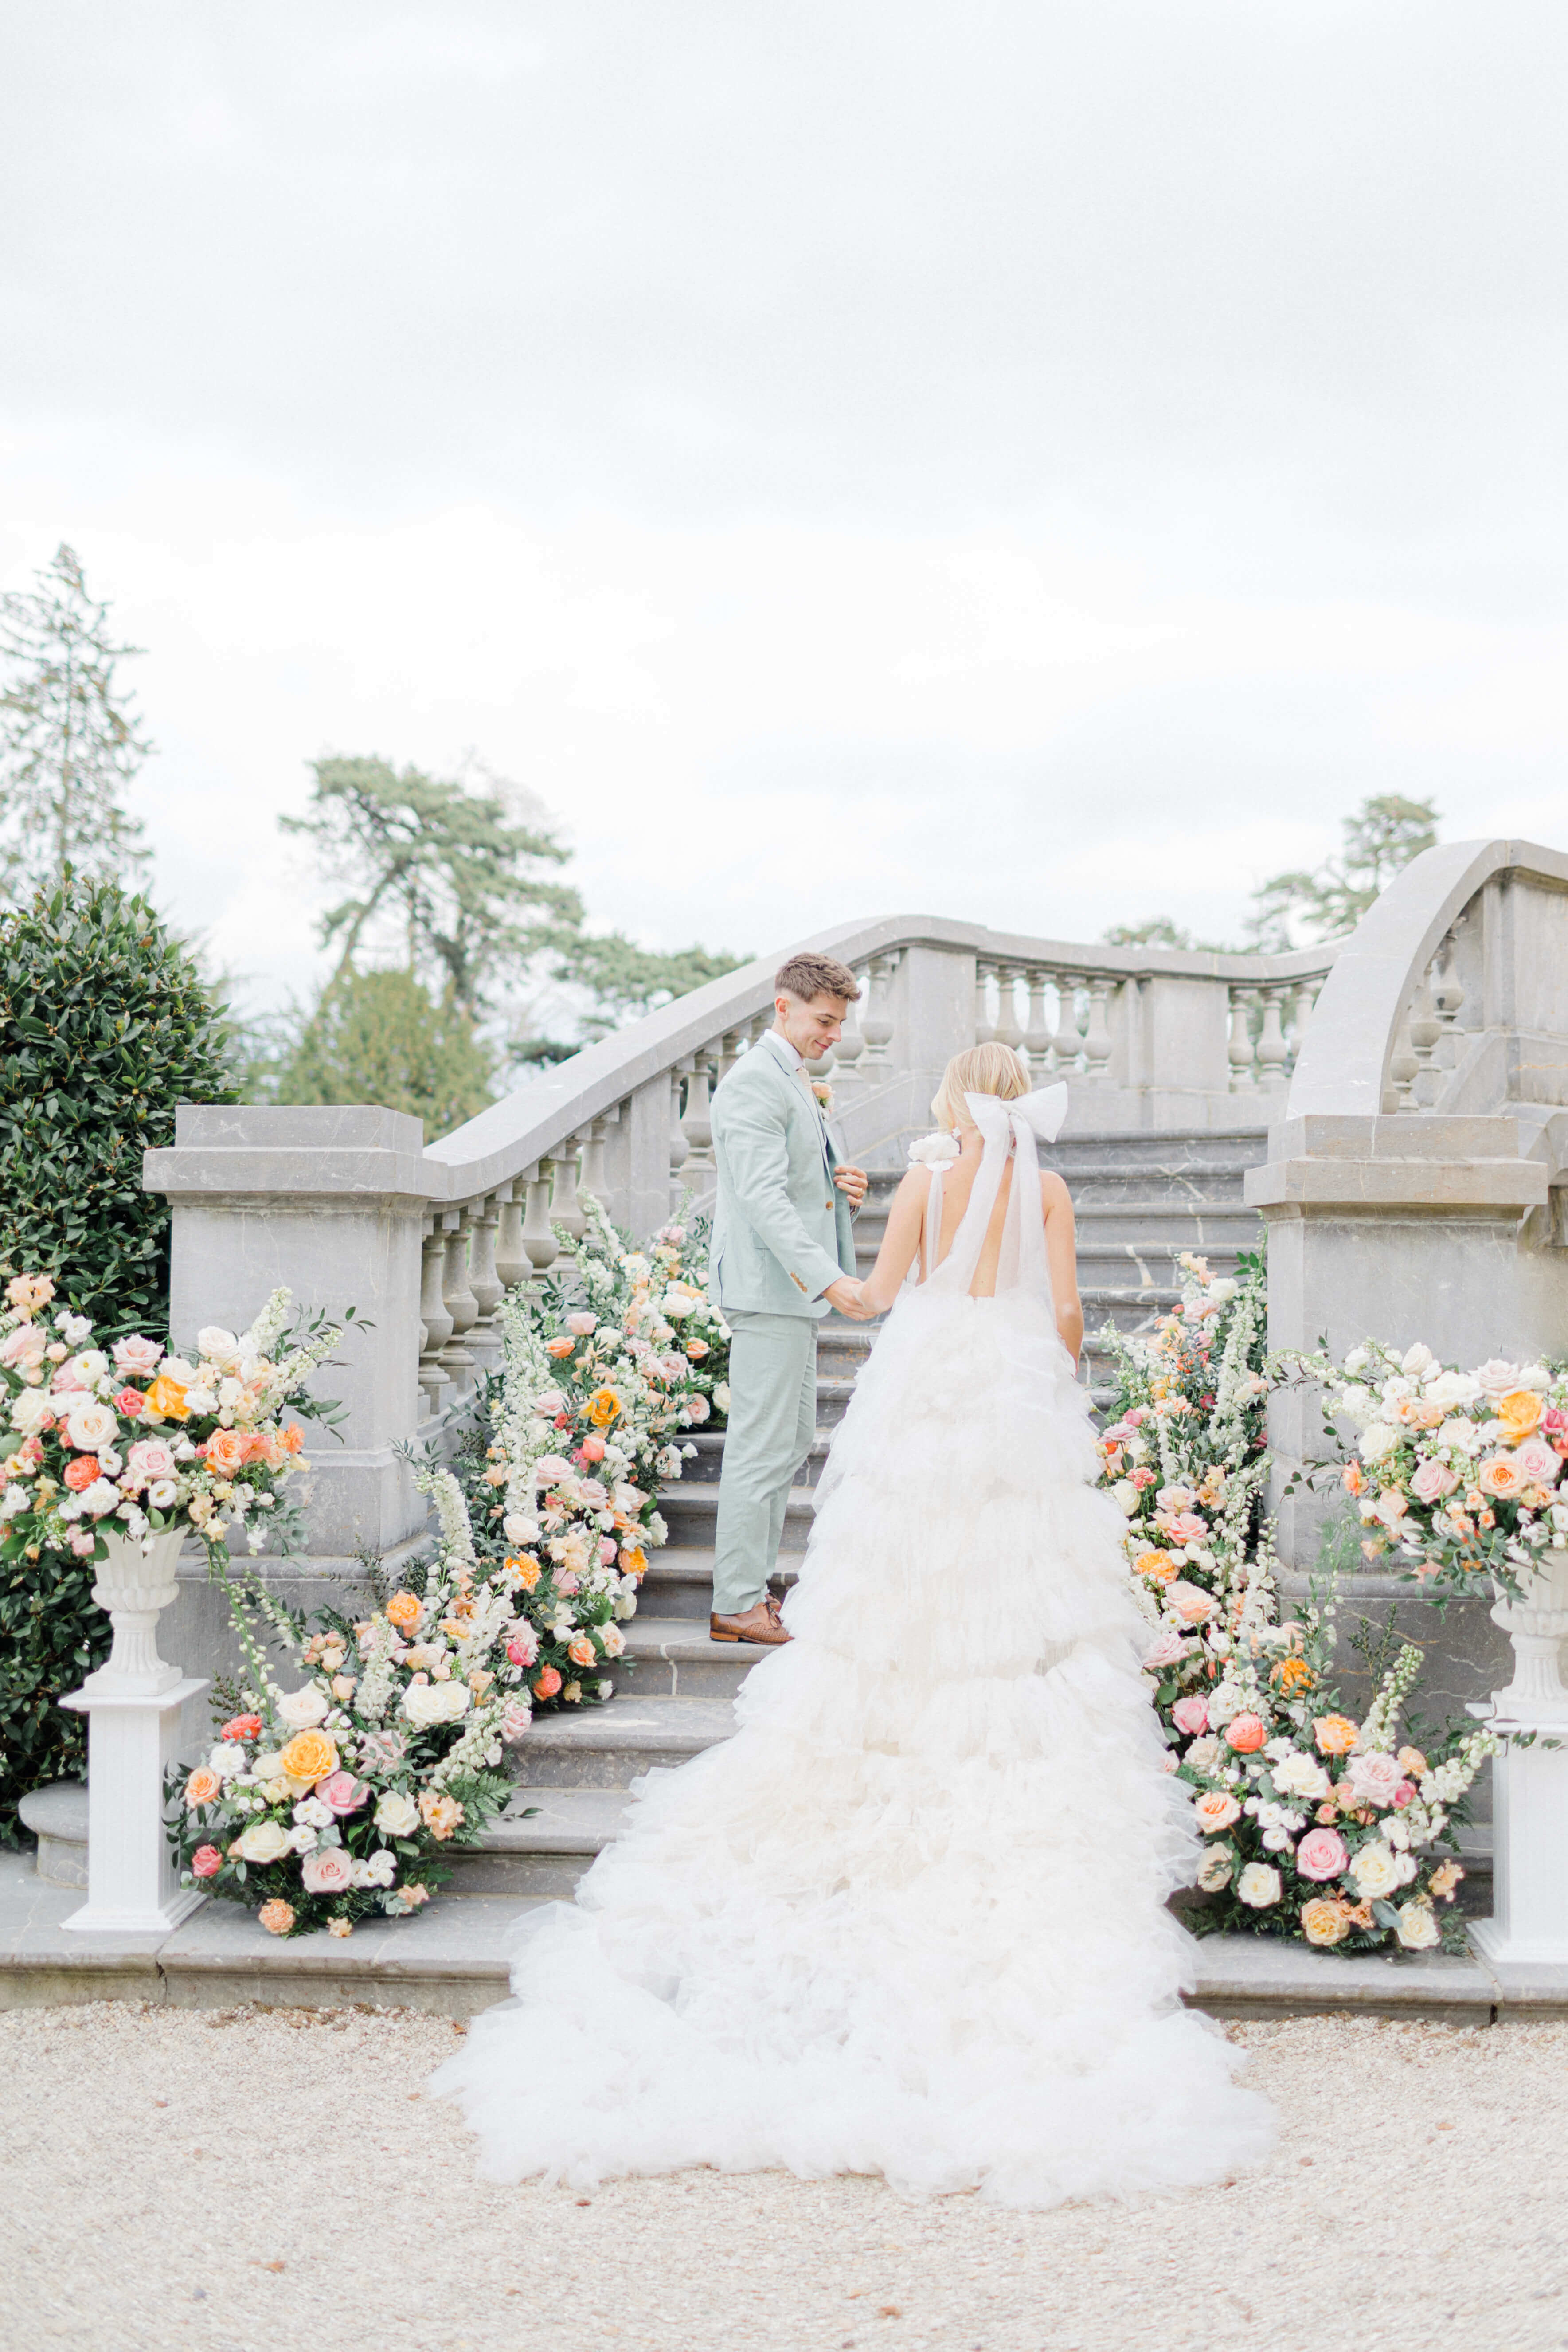 Pastel floral meadows in a semi arch on a staircase at chateau bouffemont, with newly weds walking towards it. The groom is wearing a mint tux and cream tie on a white shirt. The bride's hair is tied in a high bun and she's wearing a low cut decoletté ruffle white dress.